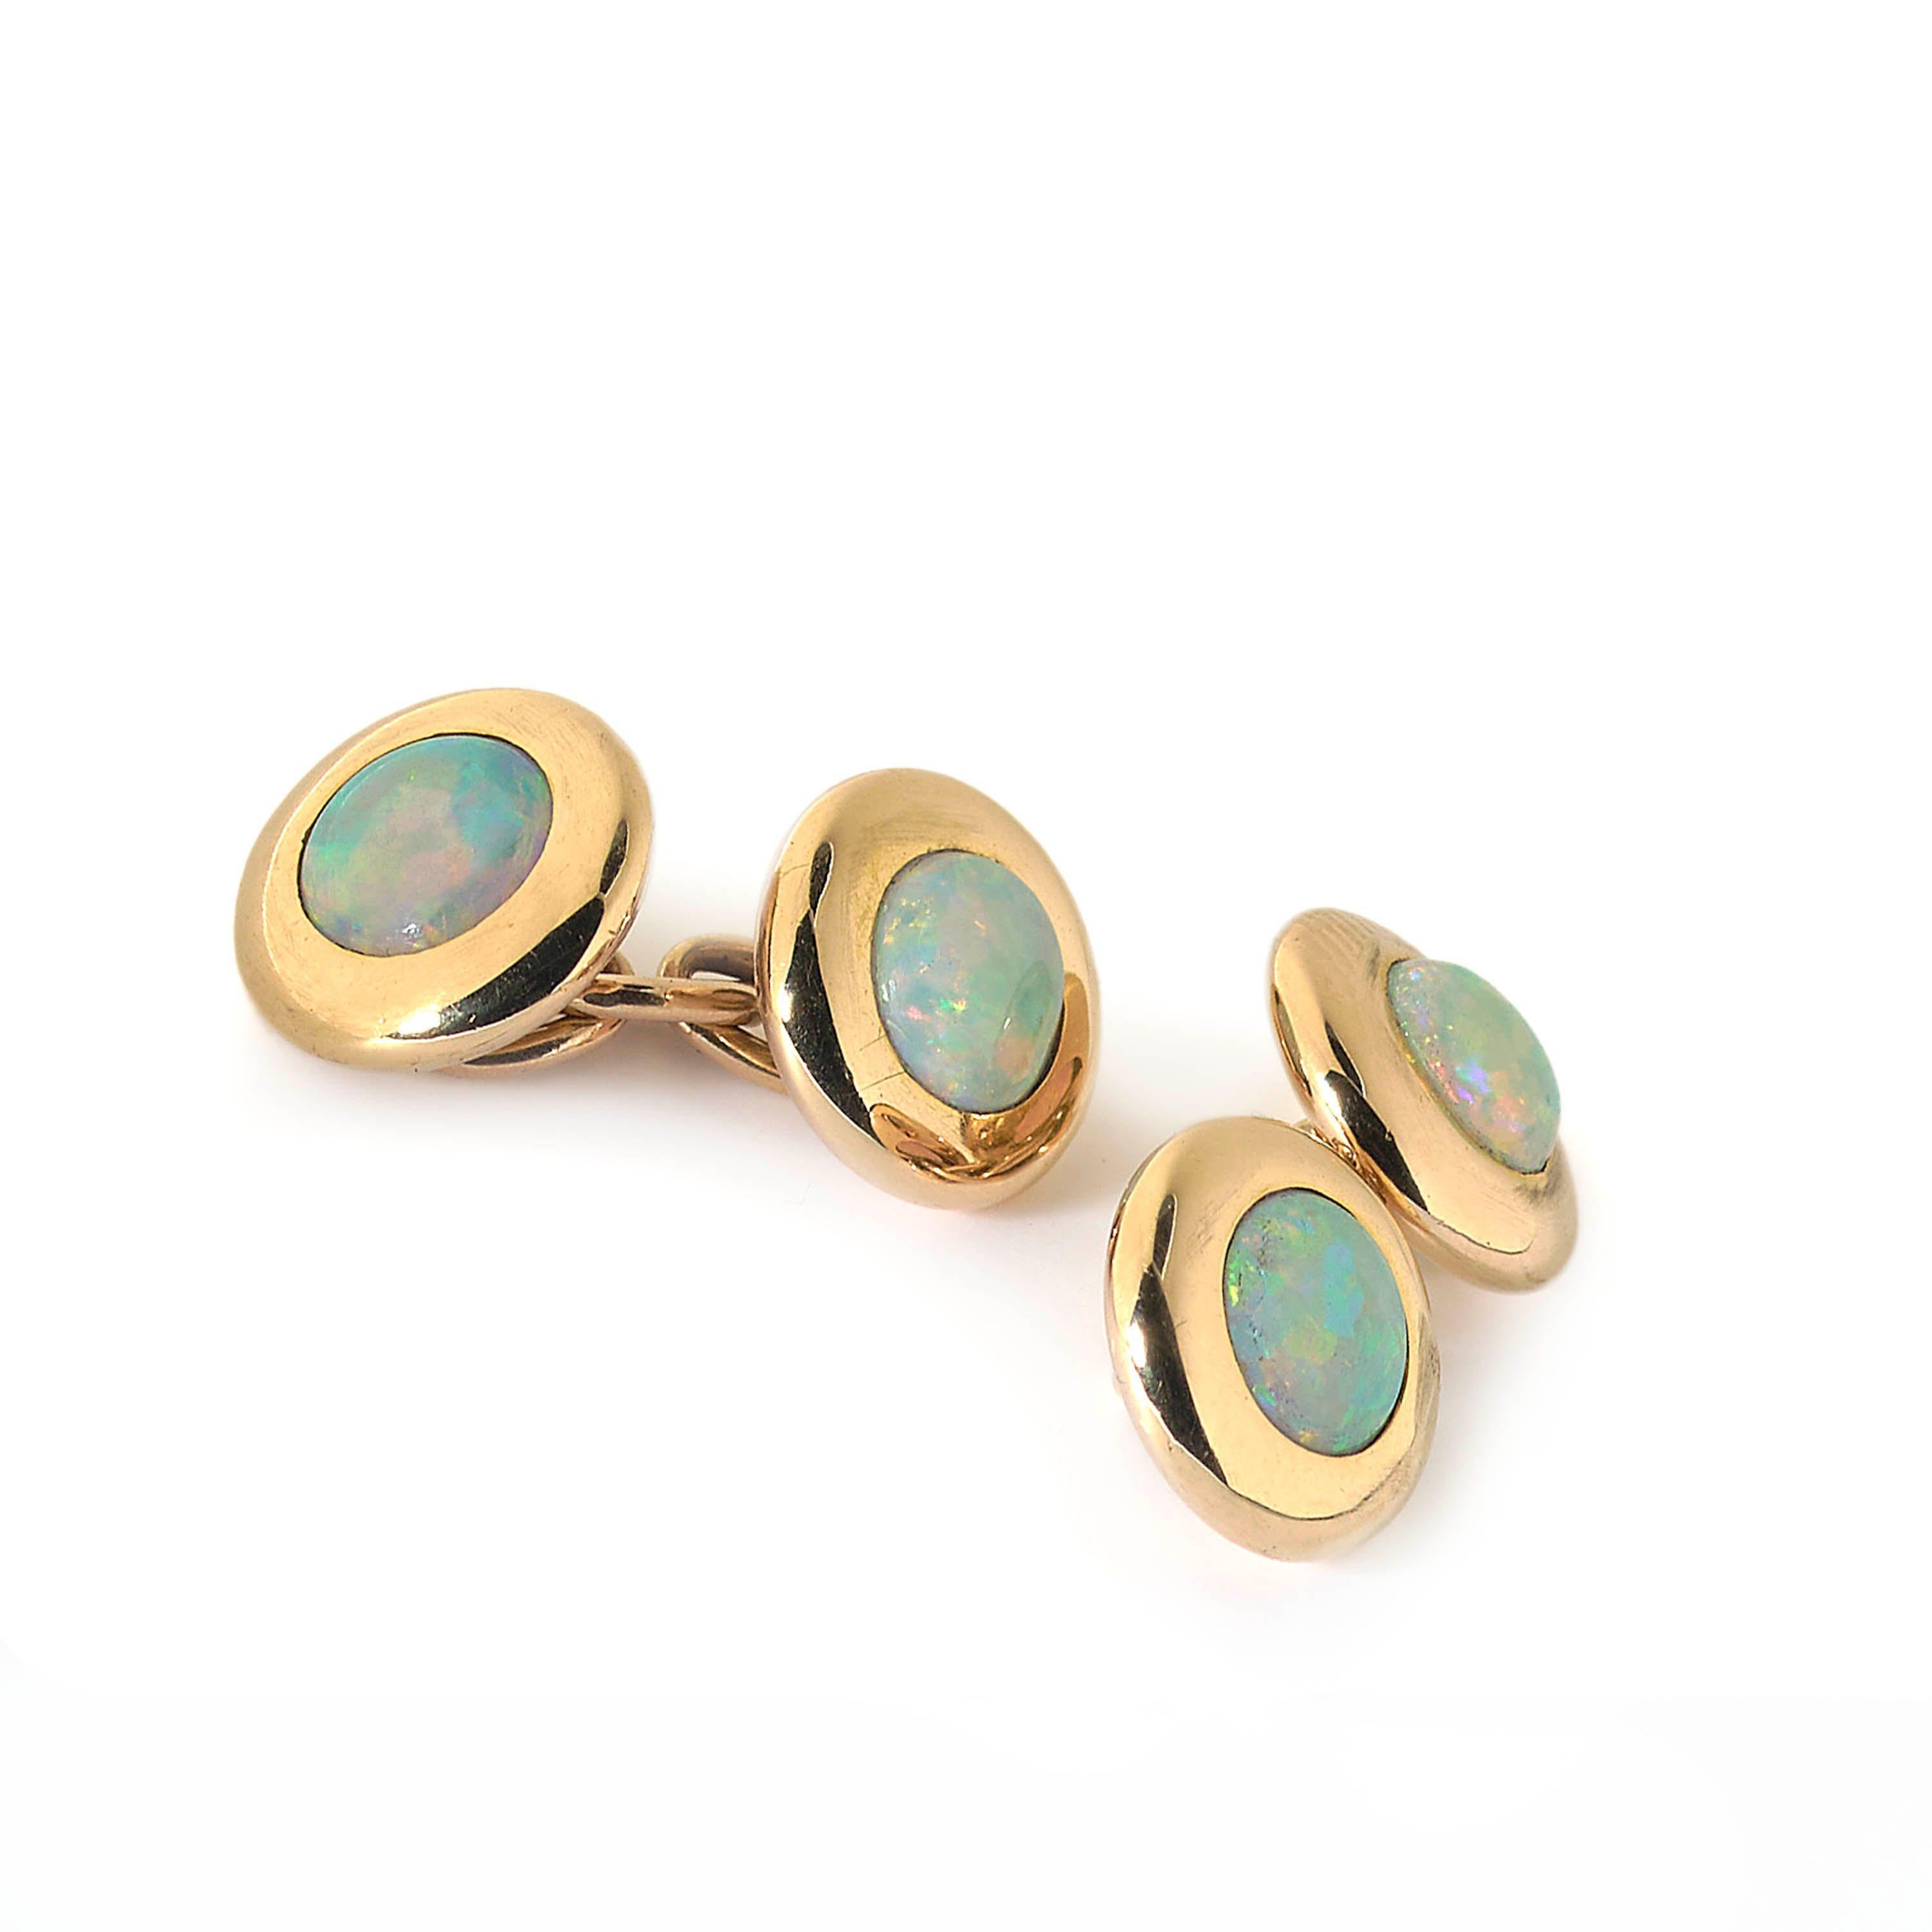 A pair of early twentieth century opal and gold cufflinks, with a single, round cabochon opal in each head, within a broad gold, domed surround, with chain link fittings, with French, shell marks, for 14ct gold, stamped more recently, for retail in